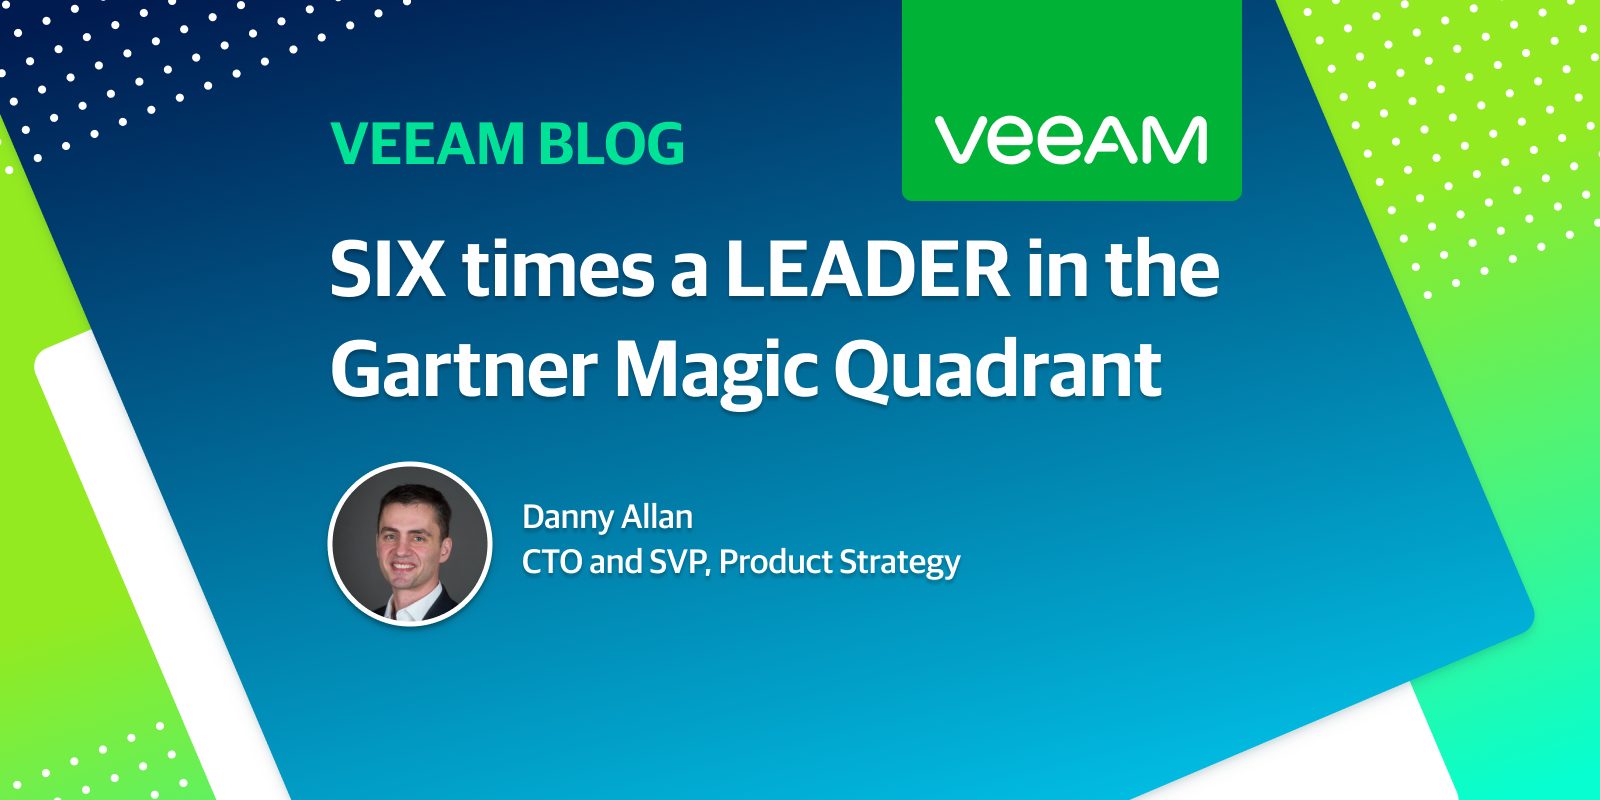 SIX periods a LEADER inside the Gartner Magic Quadrant; 12 months as Highest in Capability to Execute third consecutive